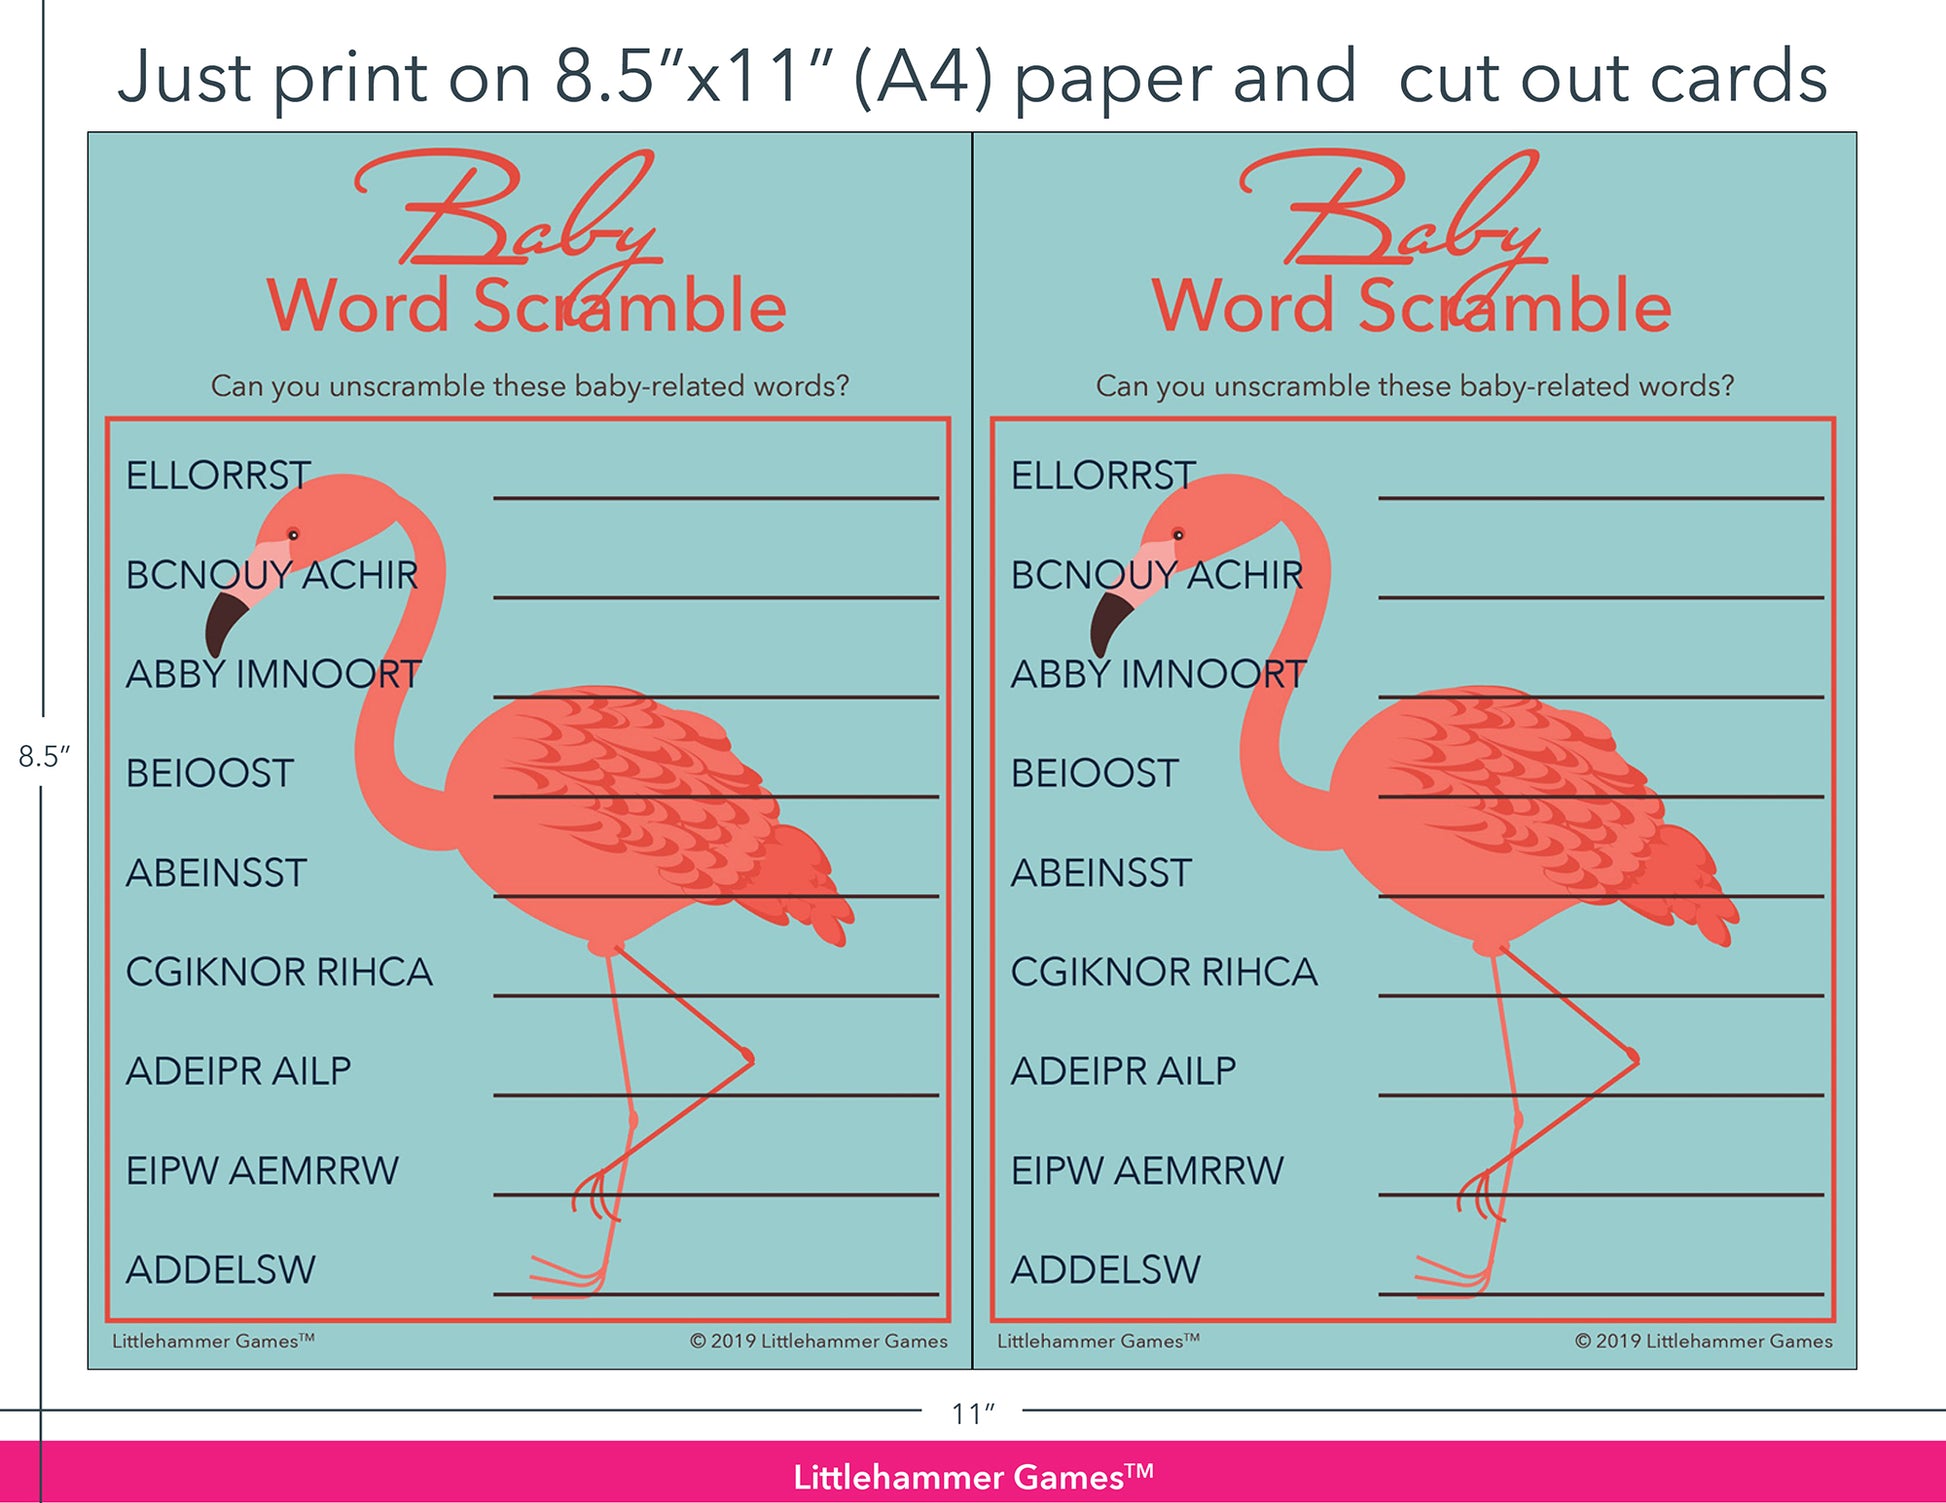 Baby Word Scramble flamingo game cards with printing instructions